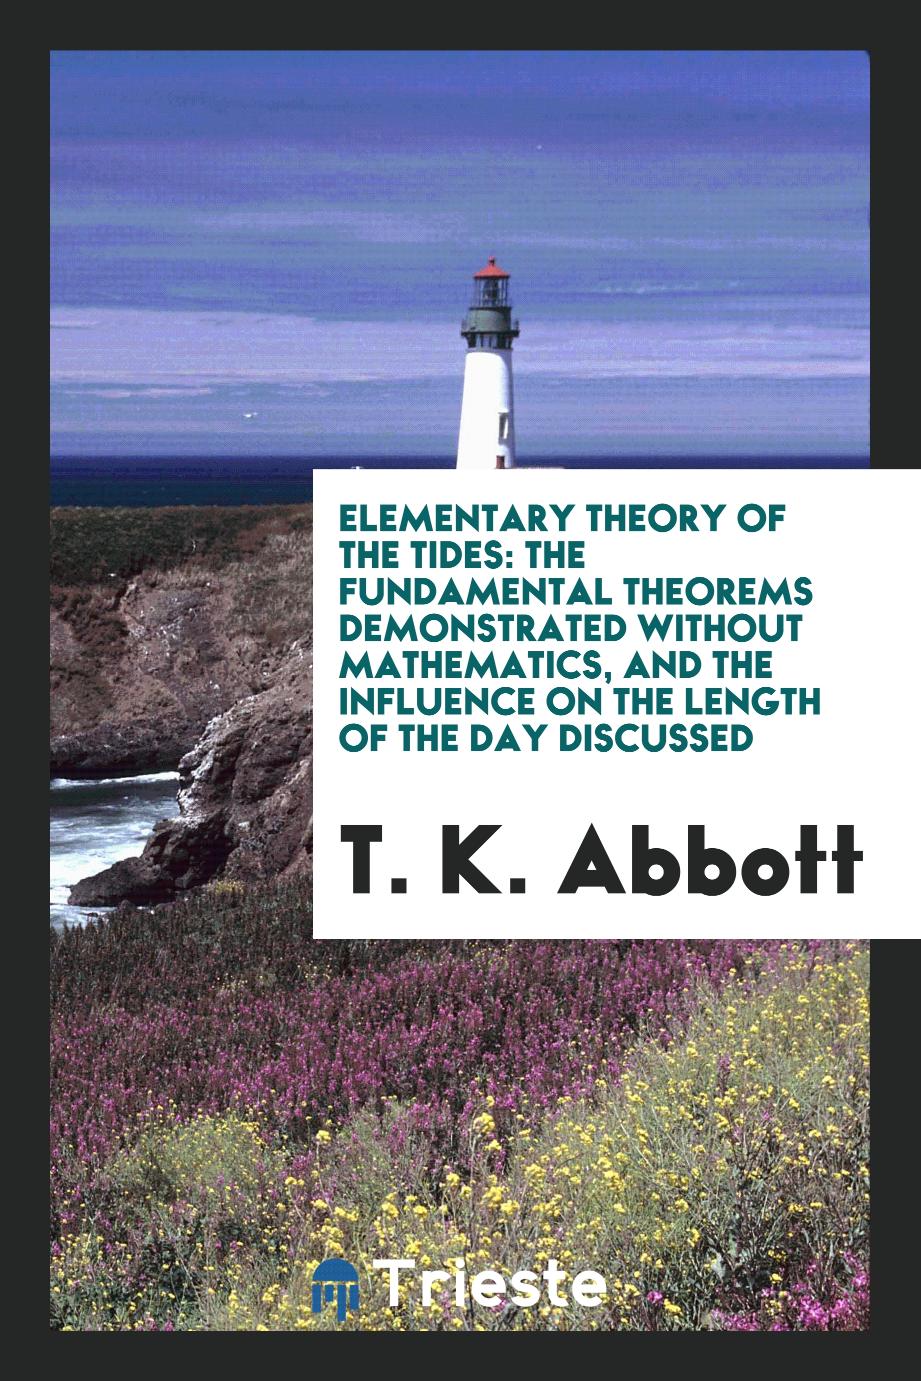 Elementary Theory of the Tides: The Fundamental Theorems Demonstrated without mathematics, and the influence on the length of the day discussed